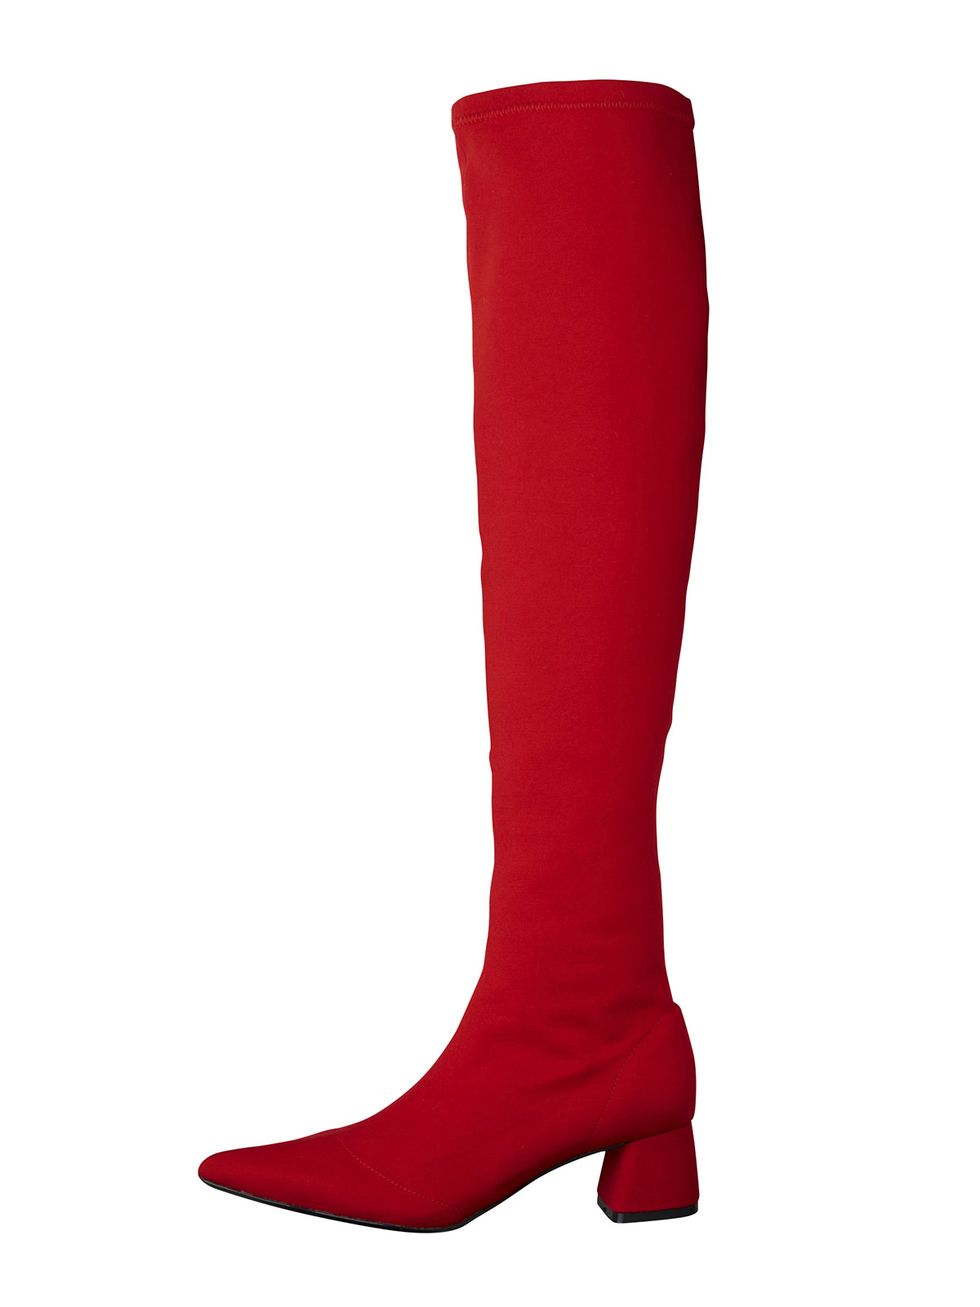 Red, Costume accessory, Carmine, Maroon, Coquelicot, Sock, Foot, Ankle, 